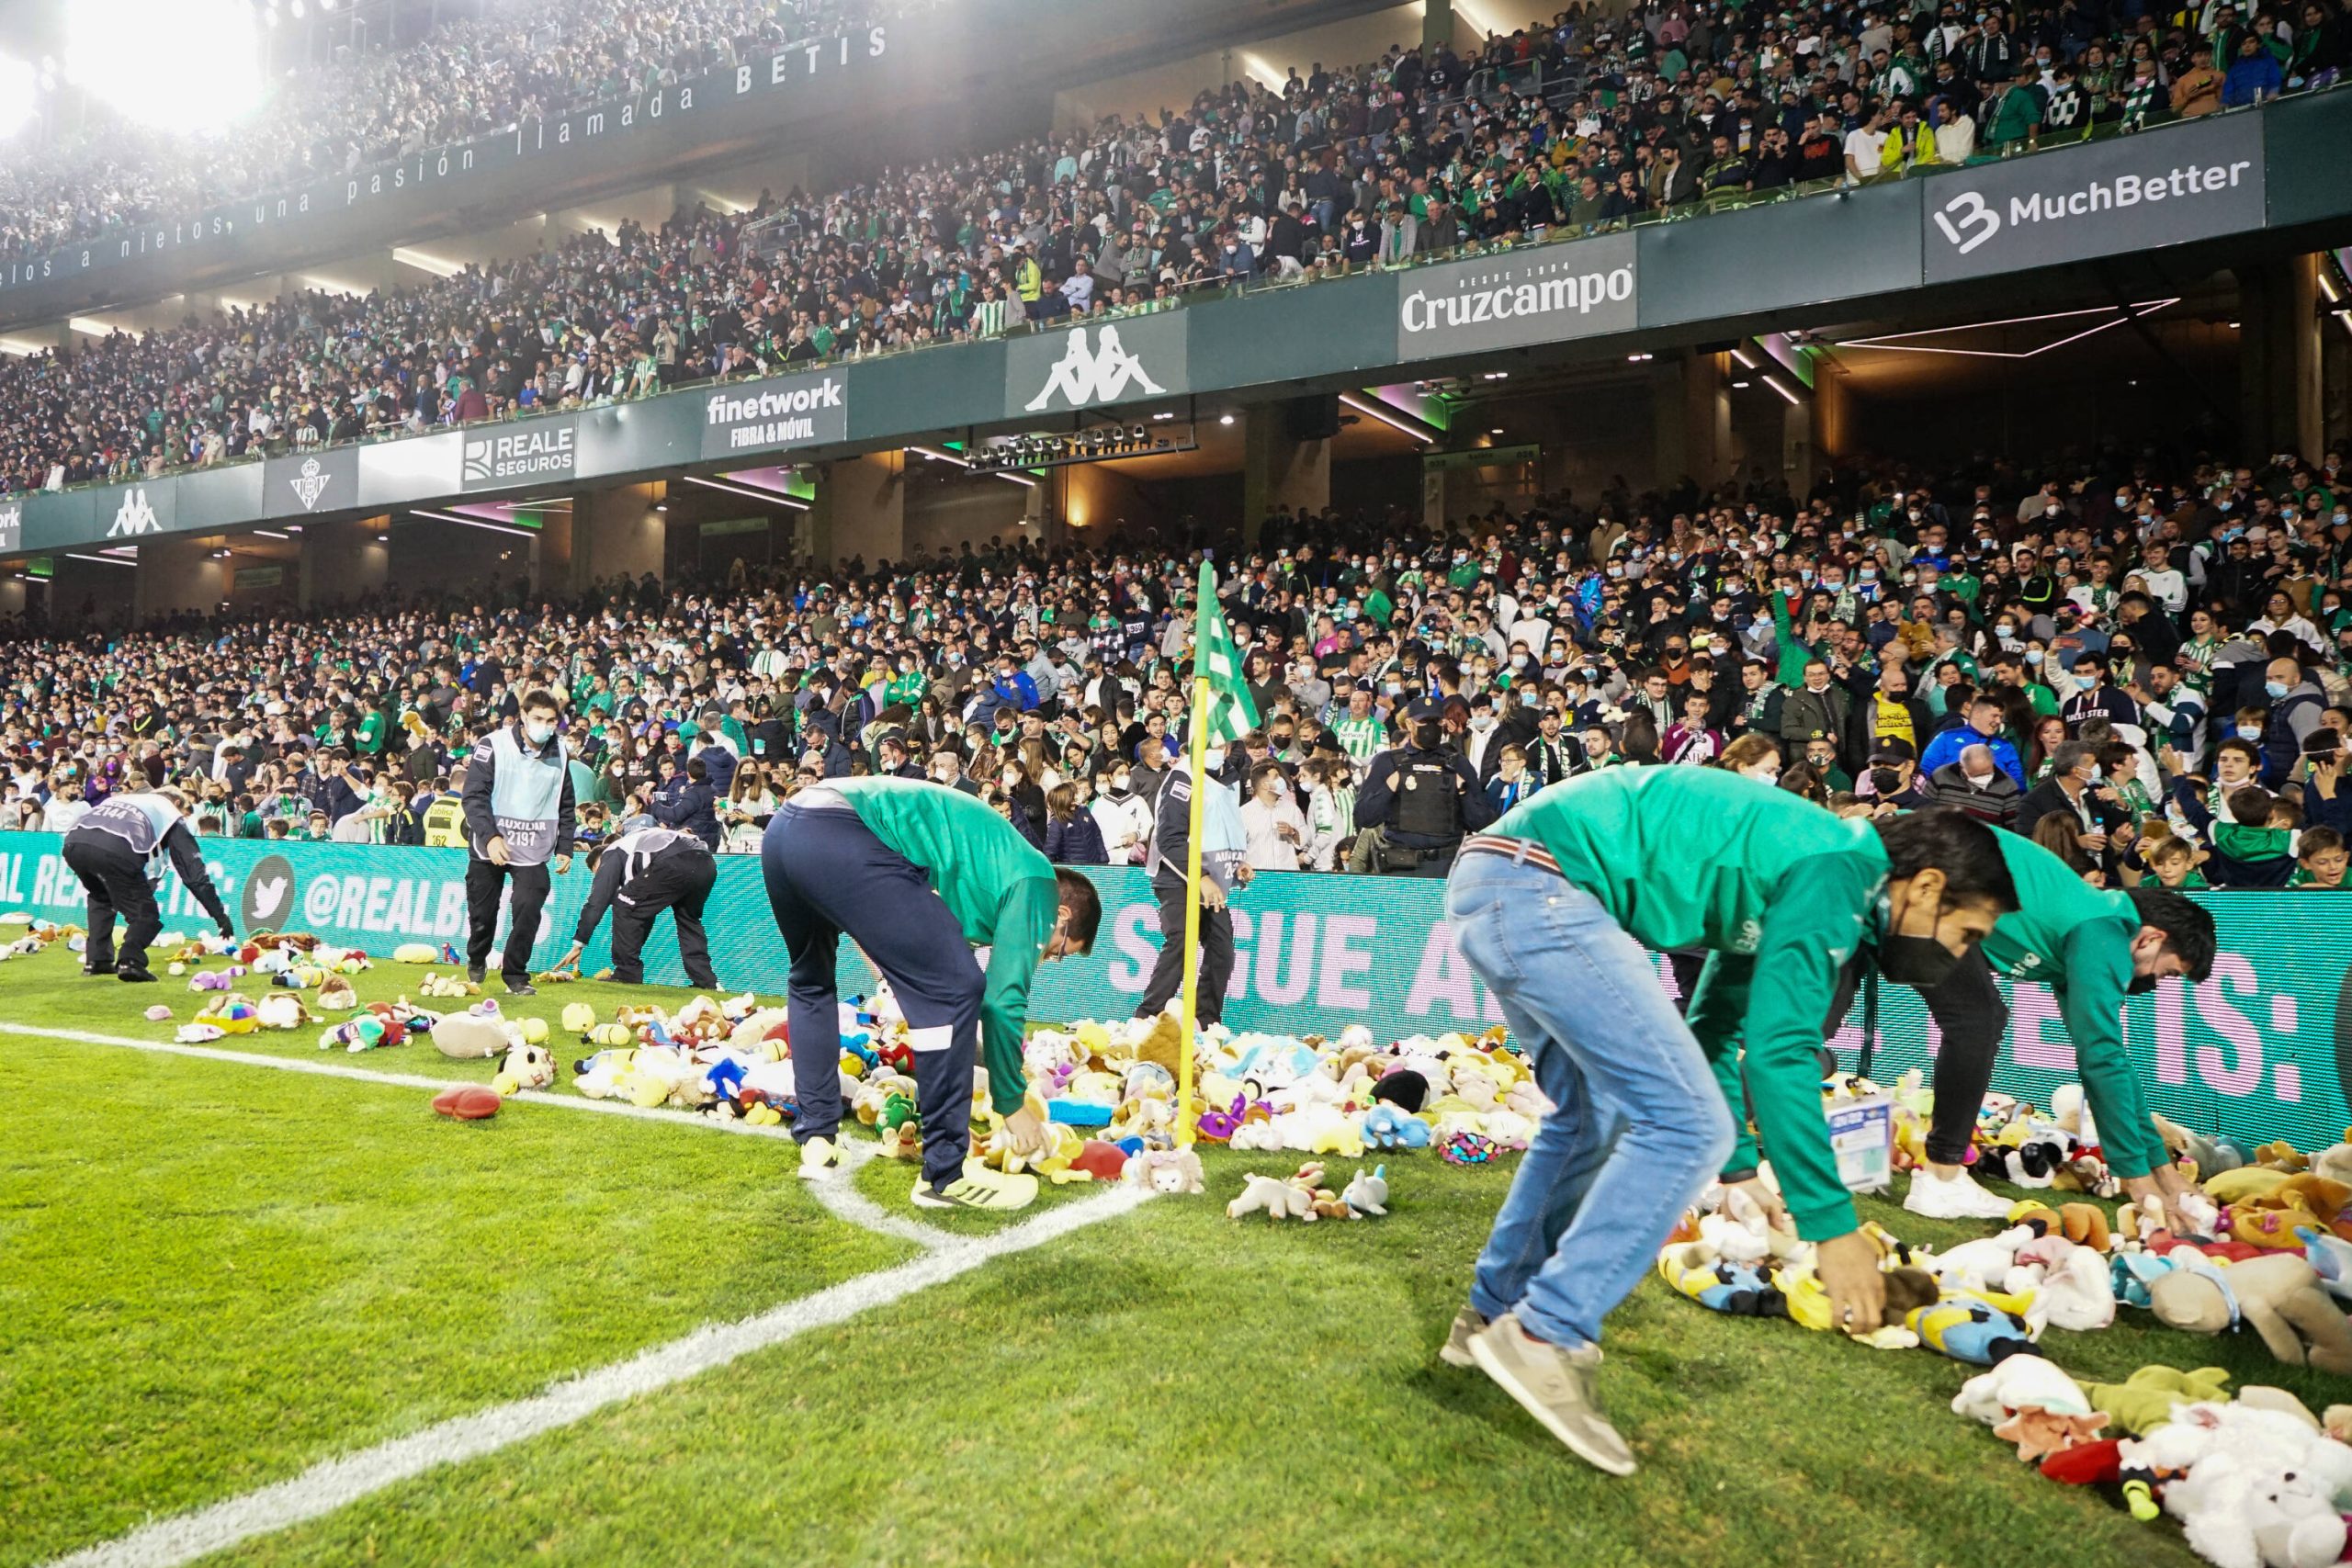 December 12, 2021, Seville, Spain: Real Betis volunteers seen collecting stuffed animals from the Benito Villamarin Stadium..Real Betis organized a rain of stuffed animals during the half time of the La Liga Santander match between Real Betis and Real Sociedad. Seville Spain - ZUMAs197 20211212_zaa_s197_311 Copyright: xFrancisxGonzalezx